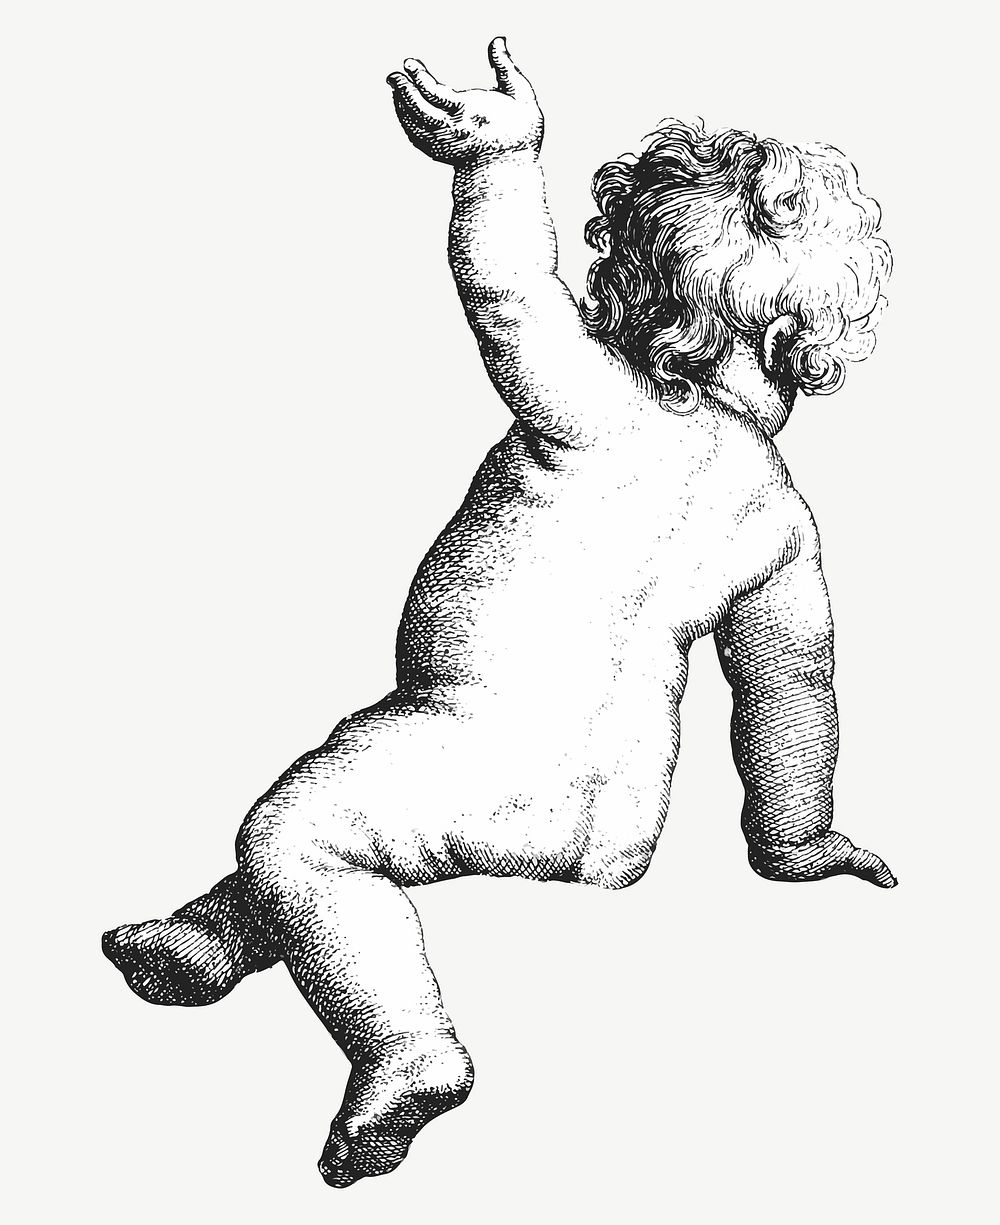 Cute cherub vector illustration, remix from artworks by Wenceslaus Hollar